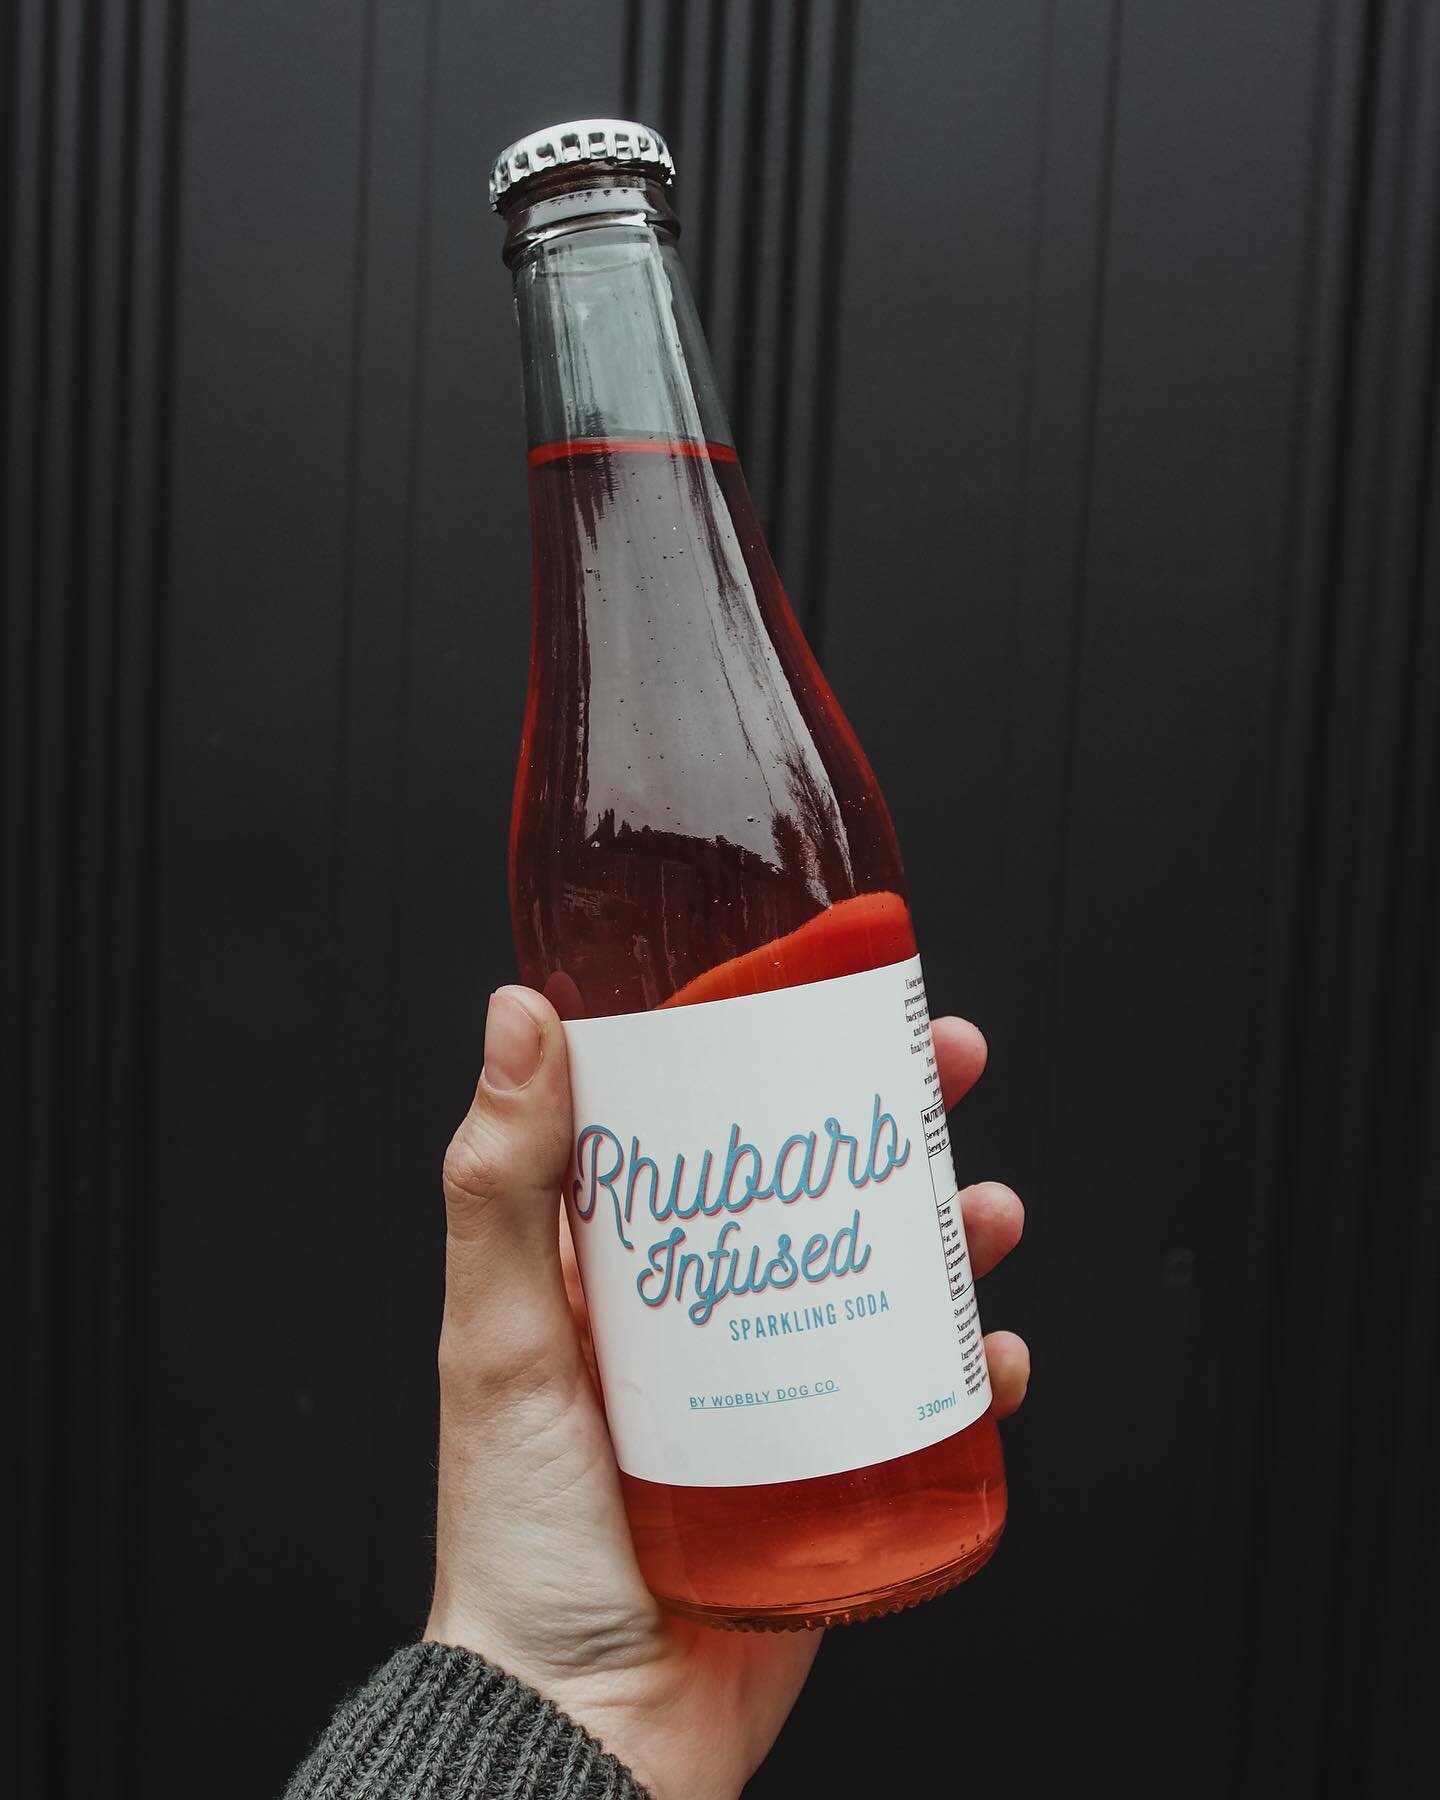 New in store! Rhubarb infused sparkling soda by @wobblydogco (can confirm it makes a lovely mixer for a glass of gin 👌)